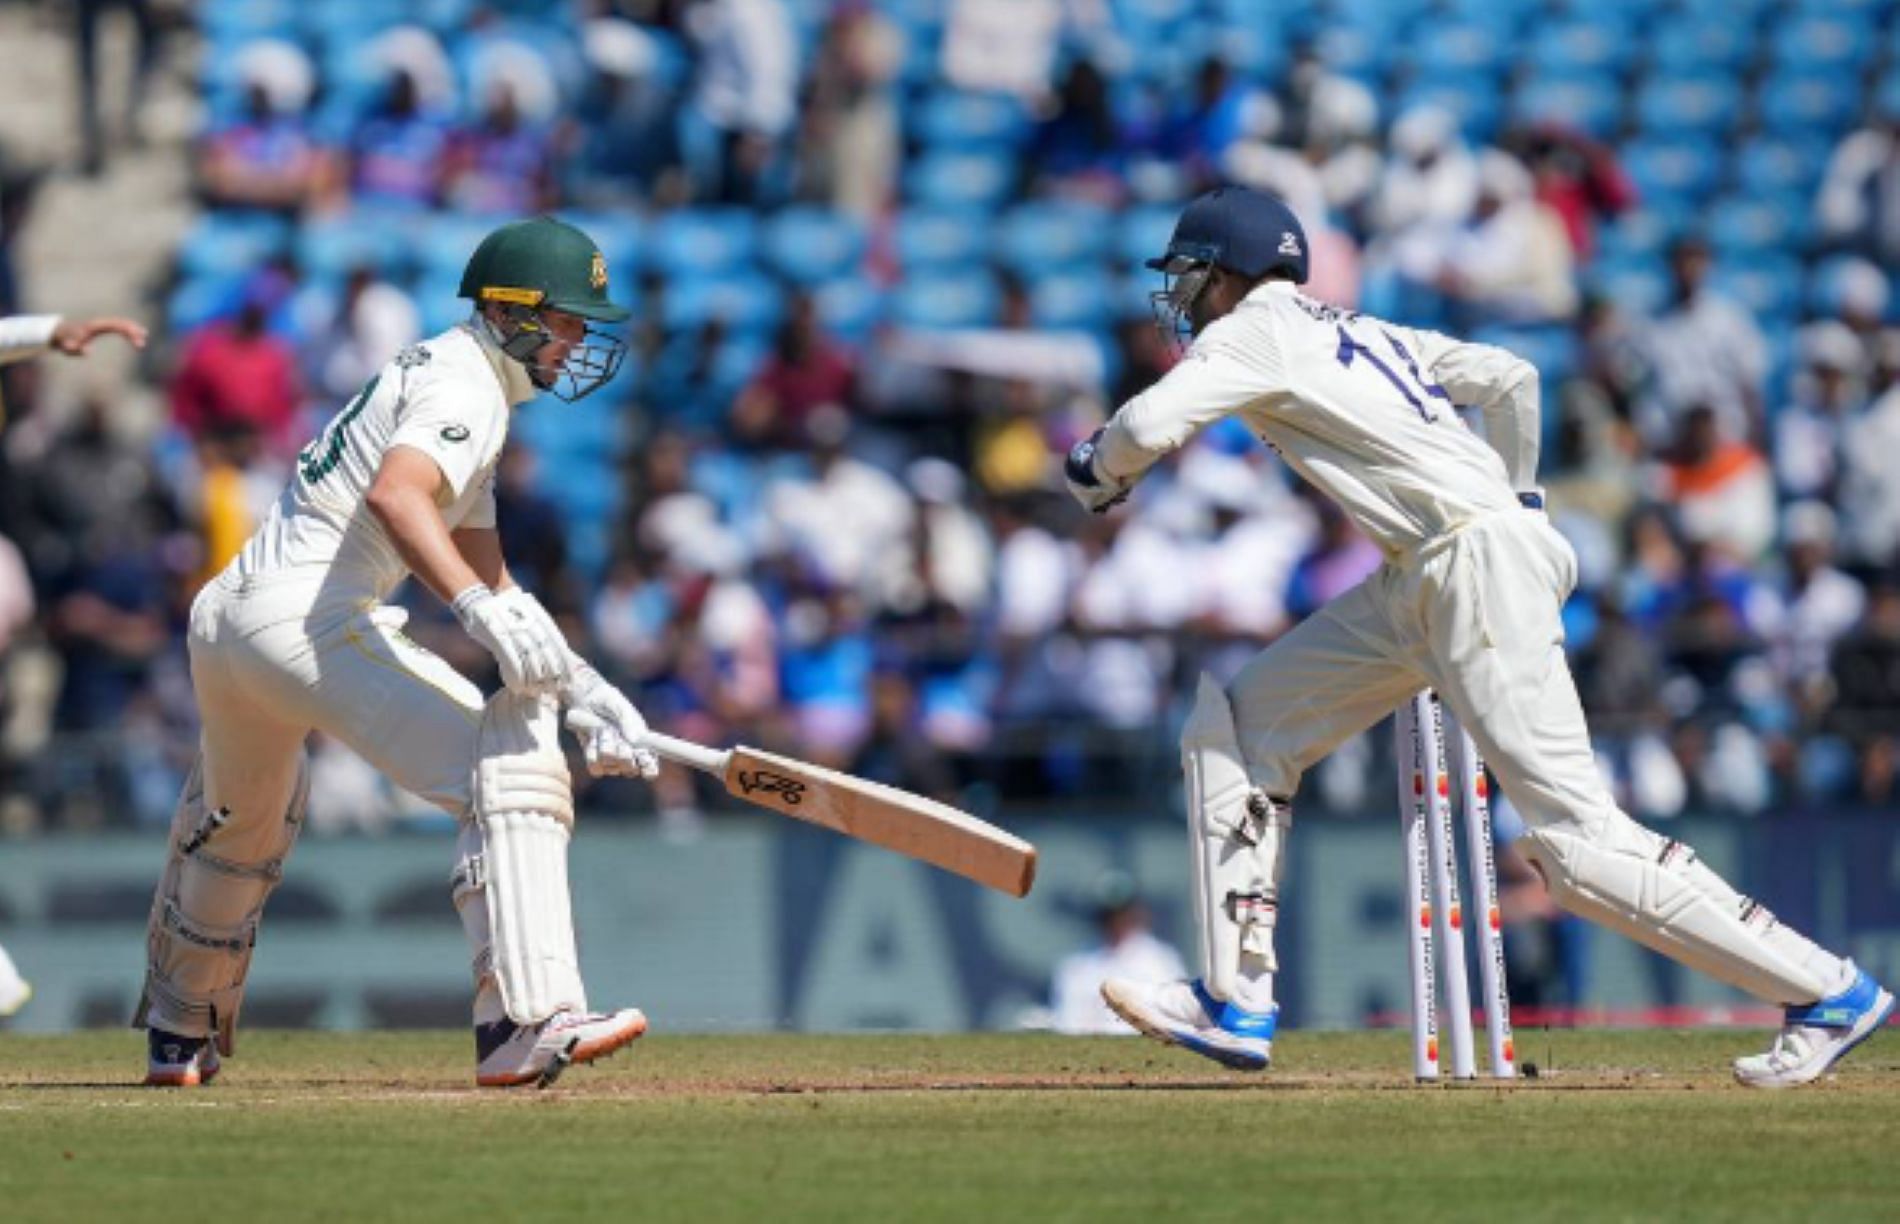 Bharat impressed behind the stumps as the home series against Australia progressed.